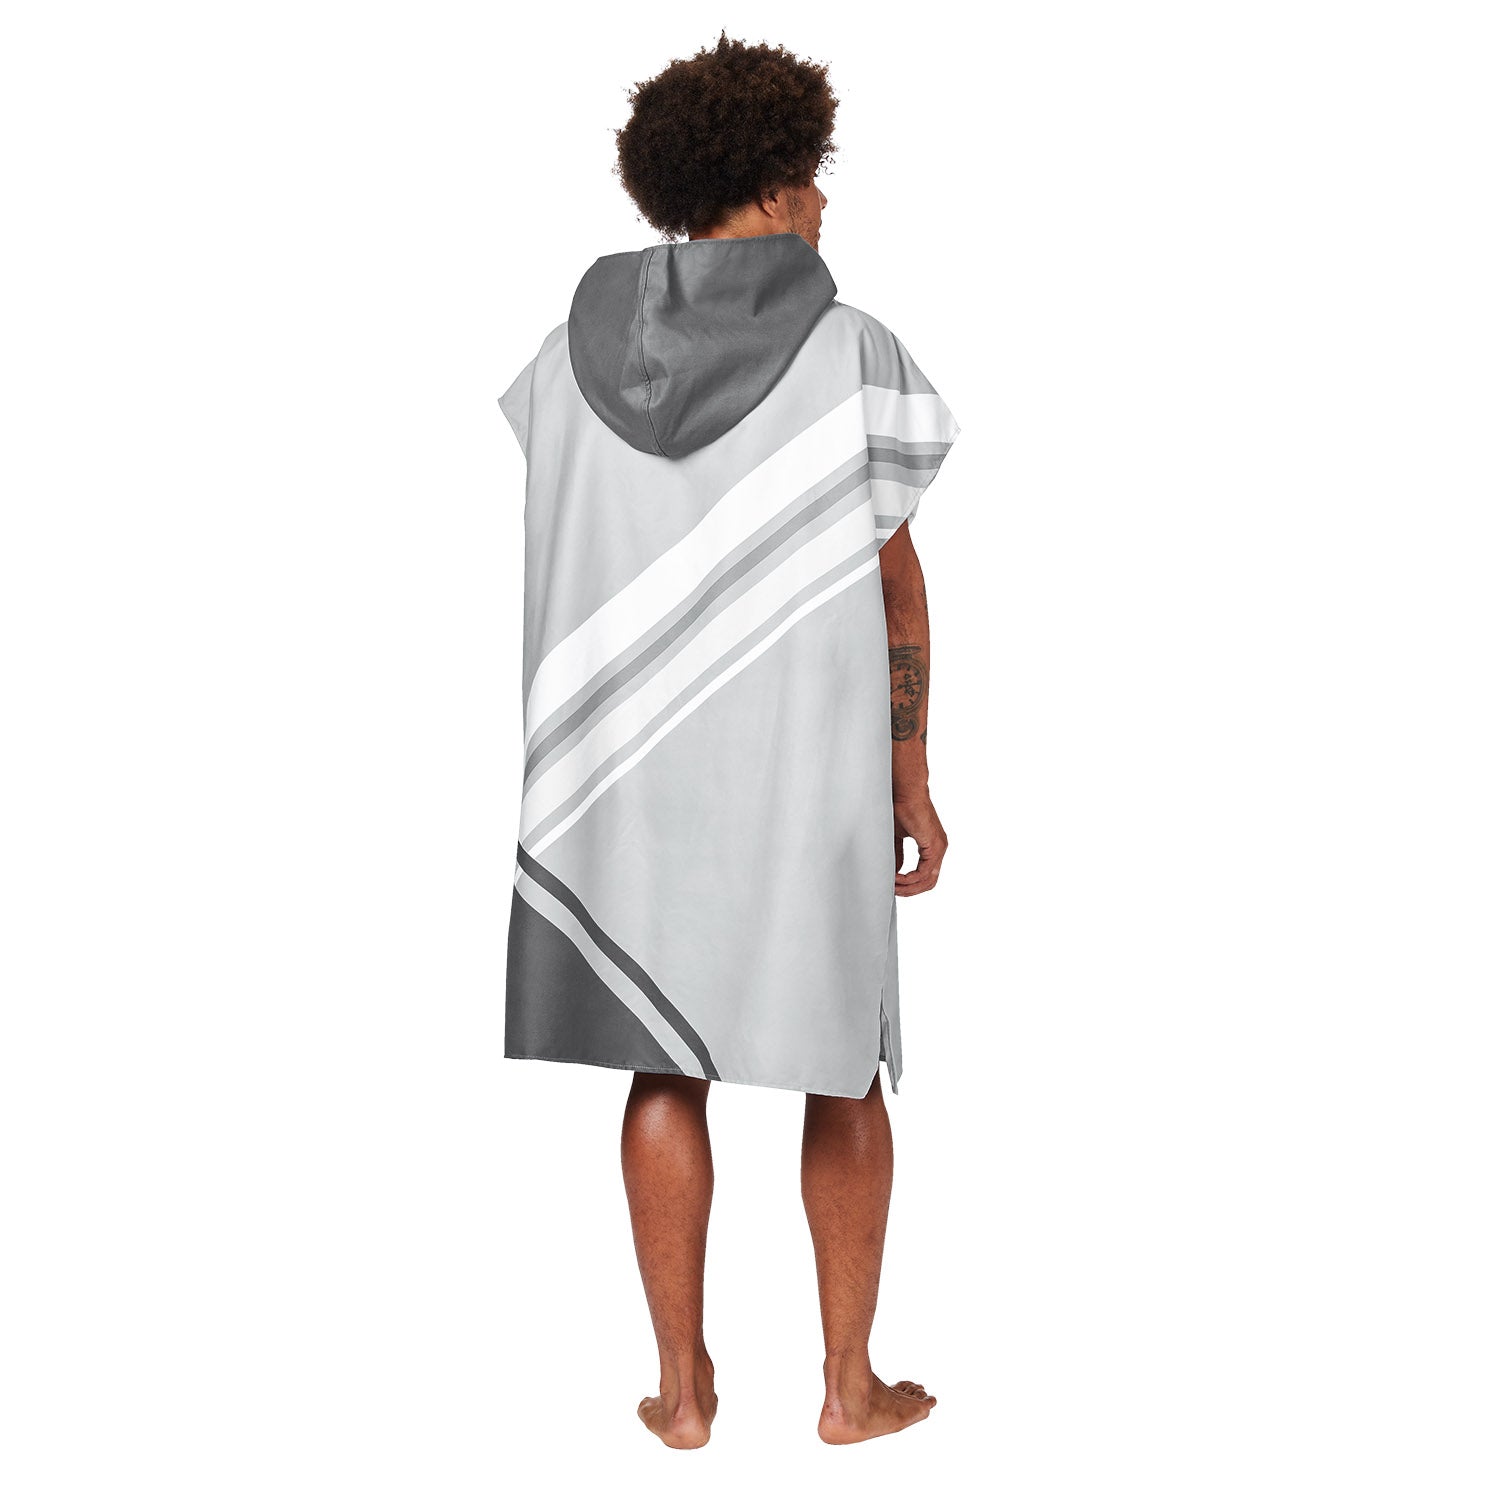 Dock & Bay Adult Poncho - Go Faster - Pace Grey